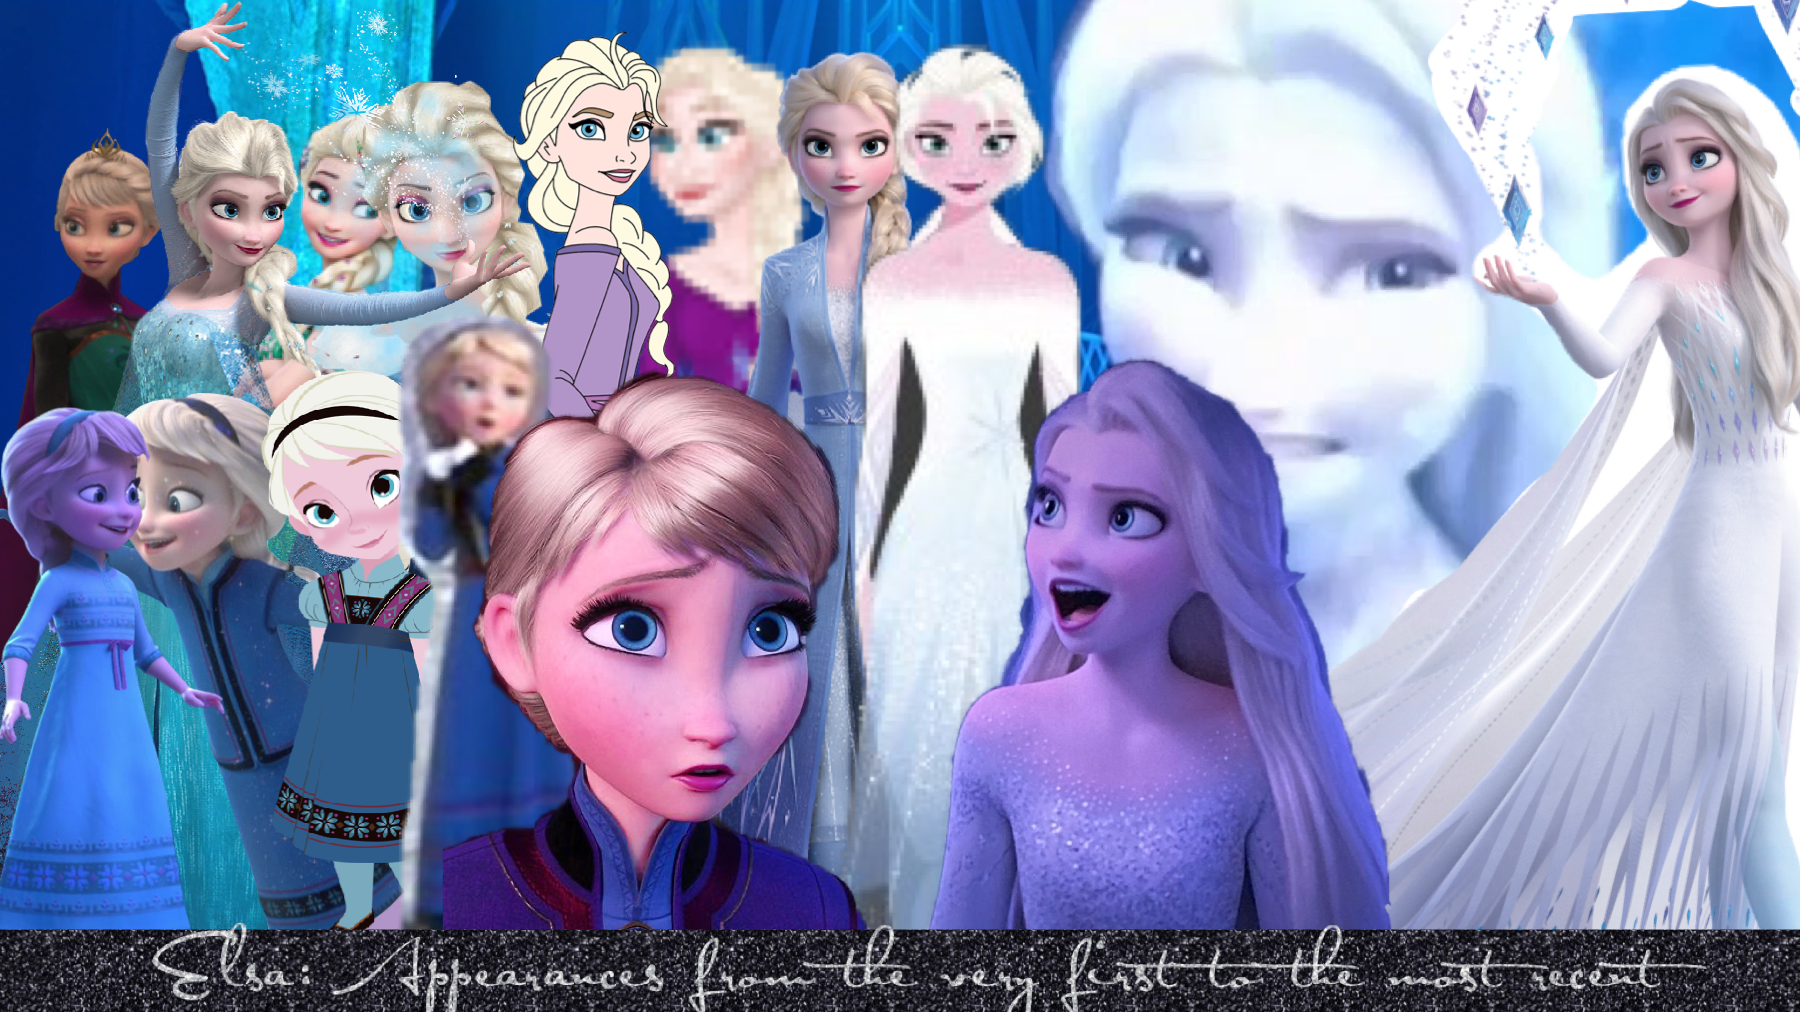 Every different look Elsa has from her first moment on the screen to what’s currently her last moment on the screen